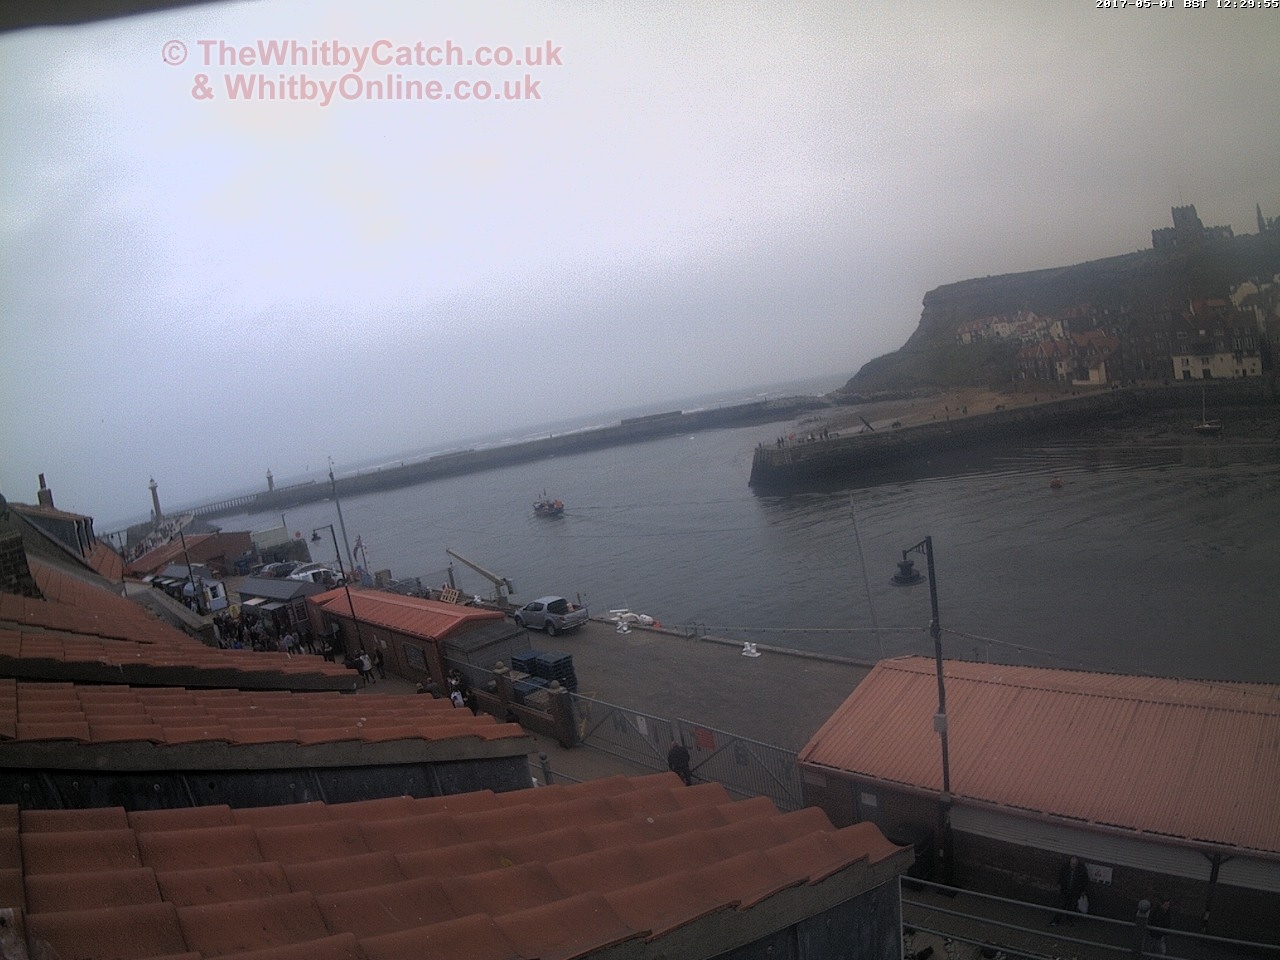 Whitby Mon 1st May 2017 12:30.